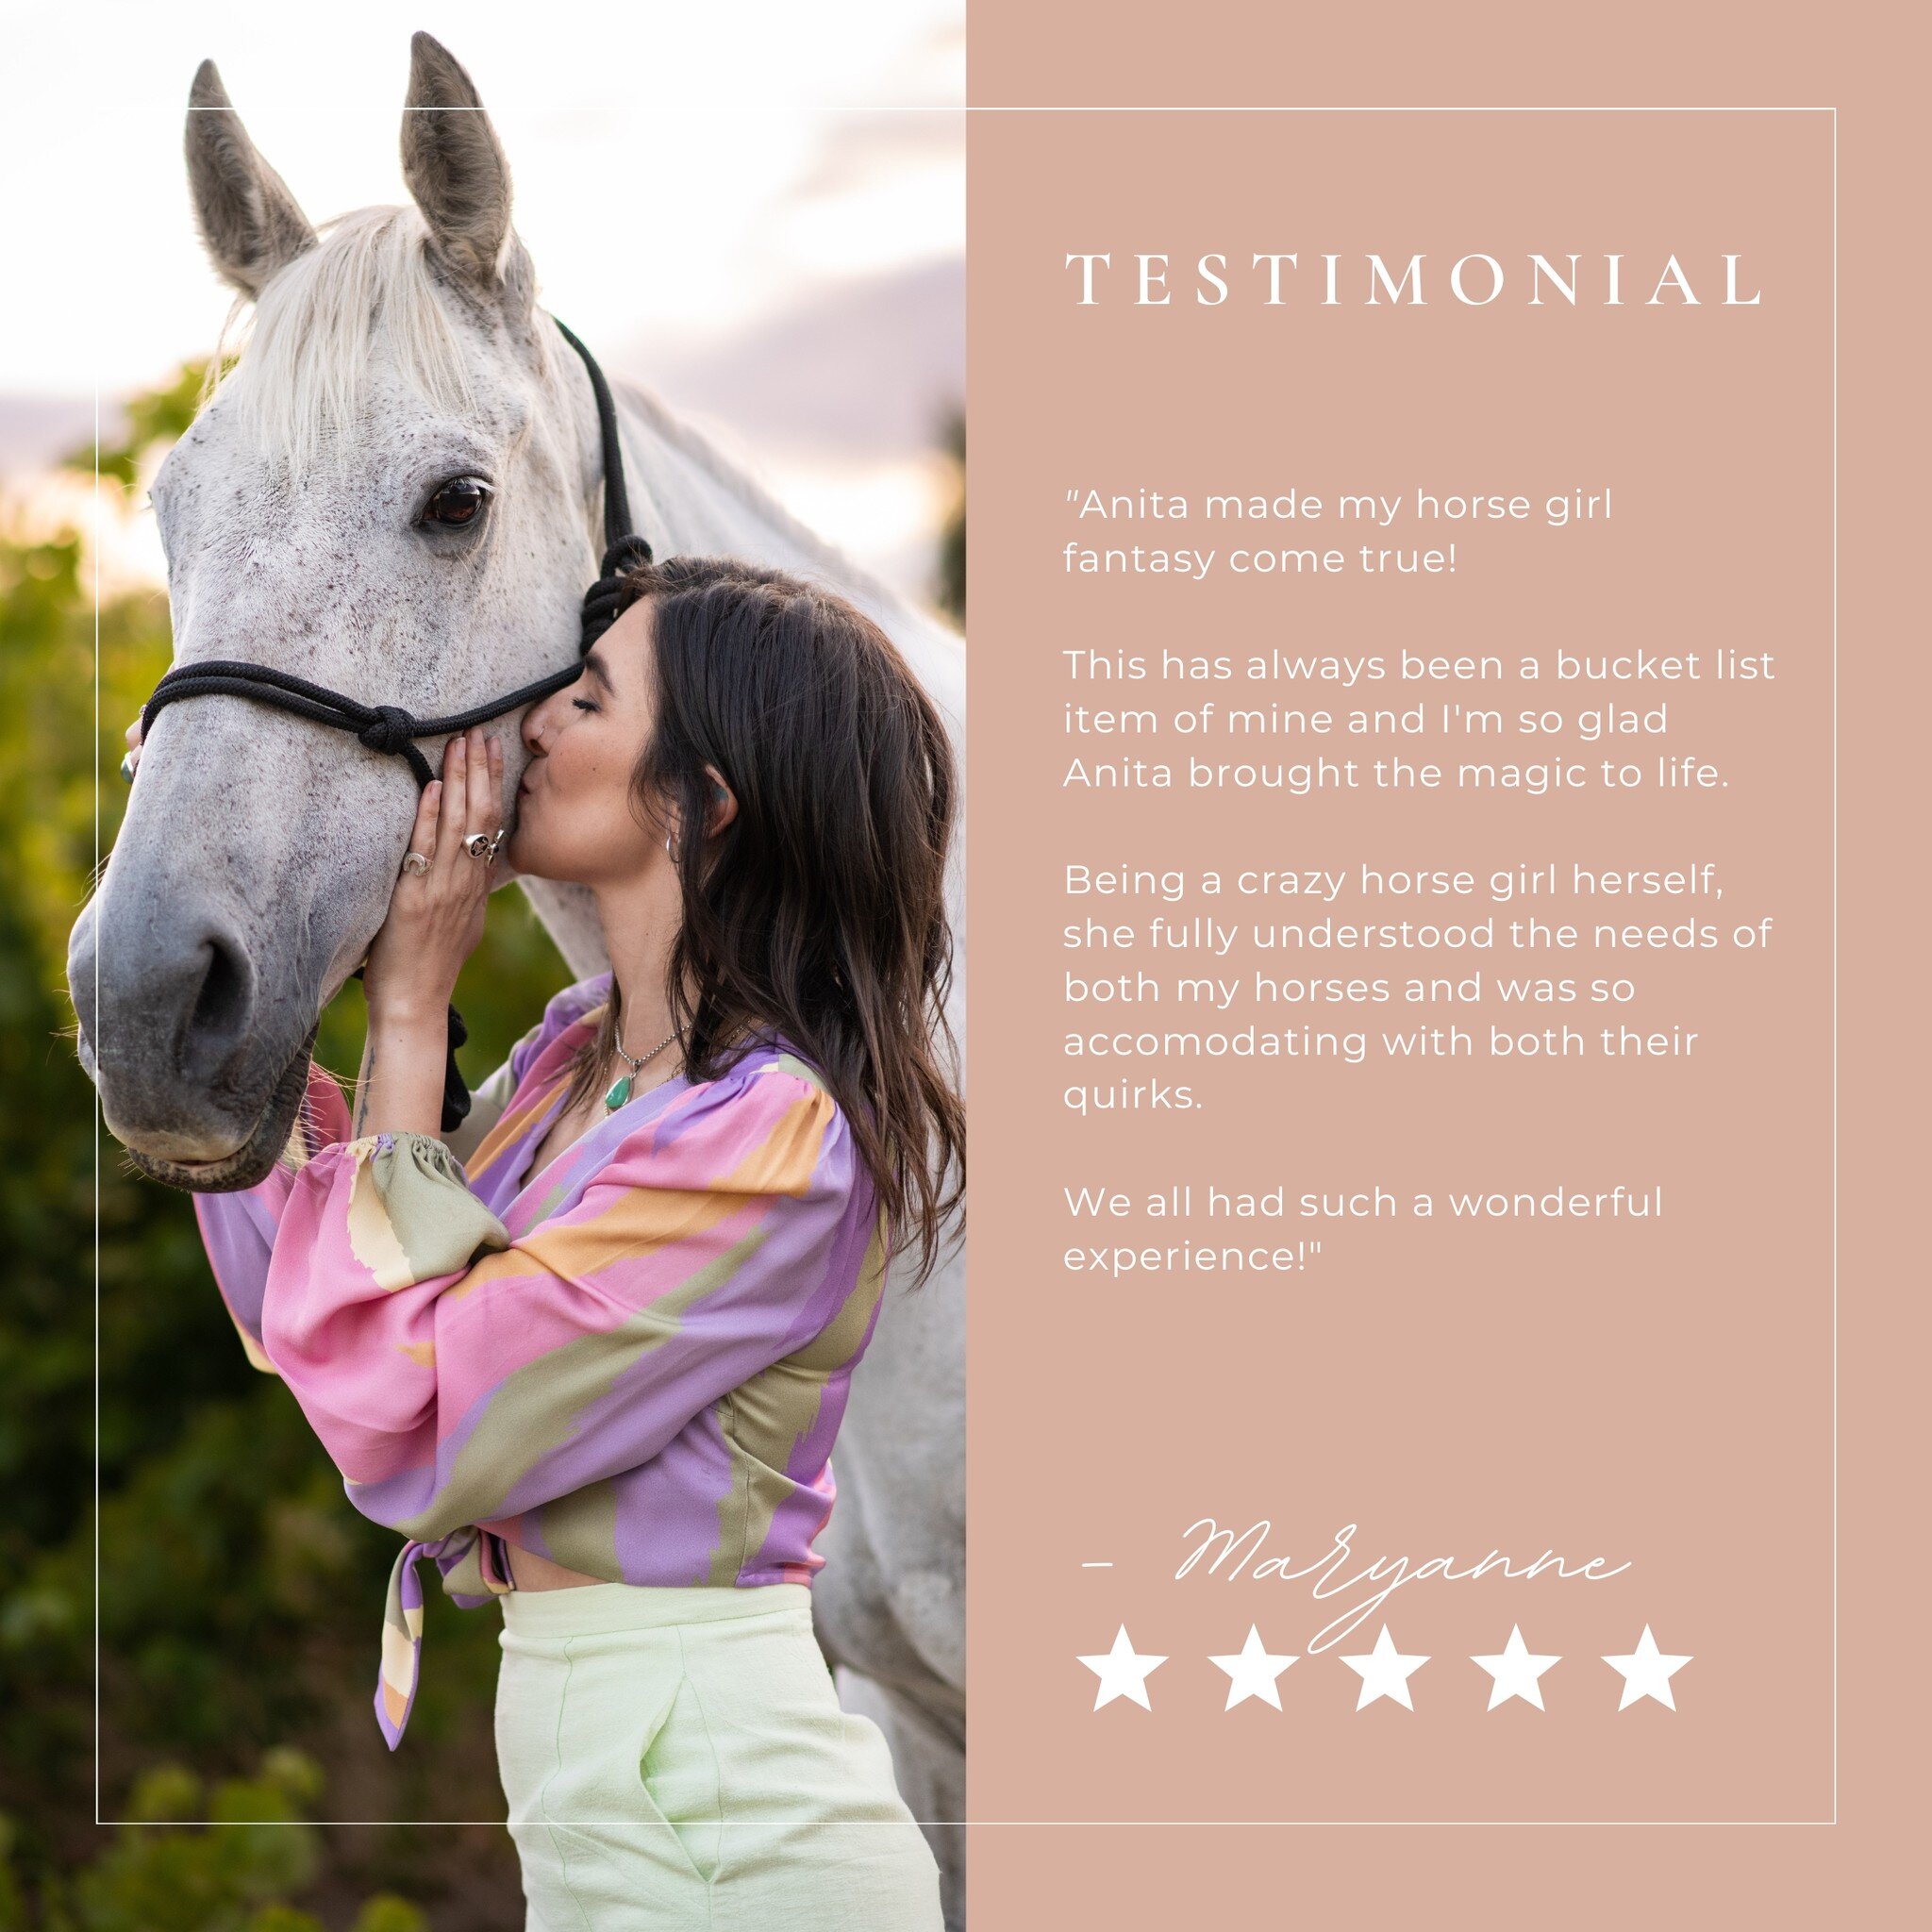 I'm here to share a heartwarming testimonial from my recent photo session with Maryanne and her stunning horses, Winter and Noah.
⁣
Maryanne had always dreamt of a horse girl fantasy and I was honoured to bring her vision to life. As a fellow horse l